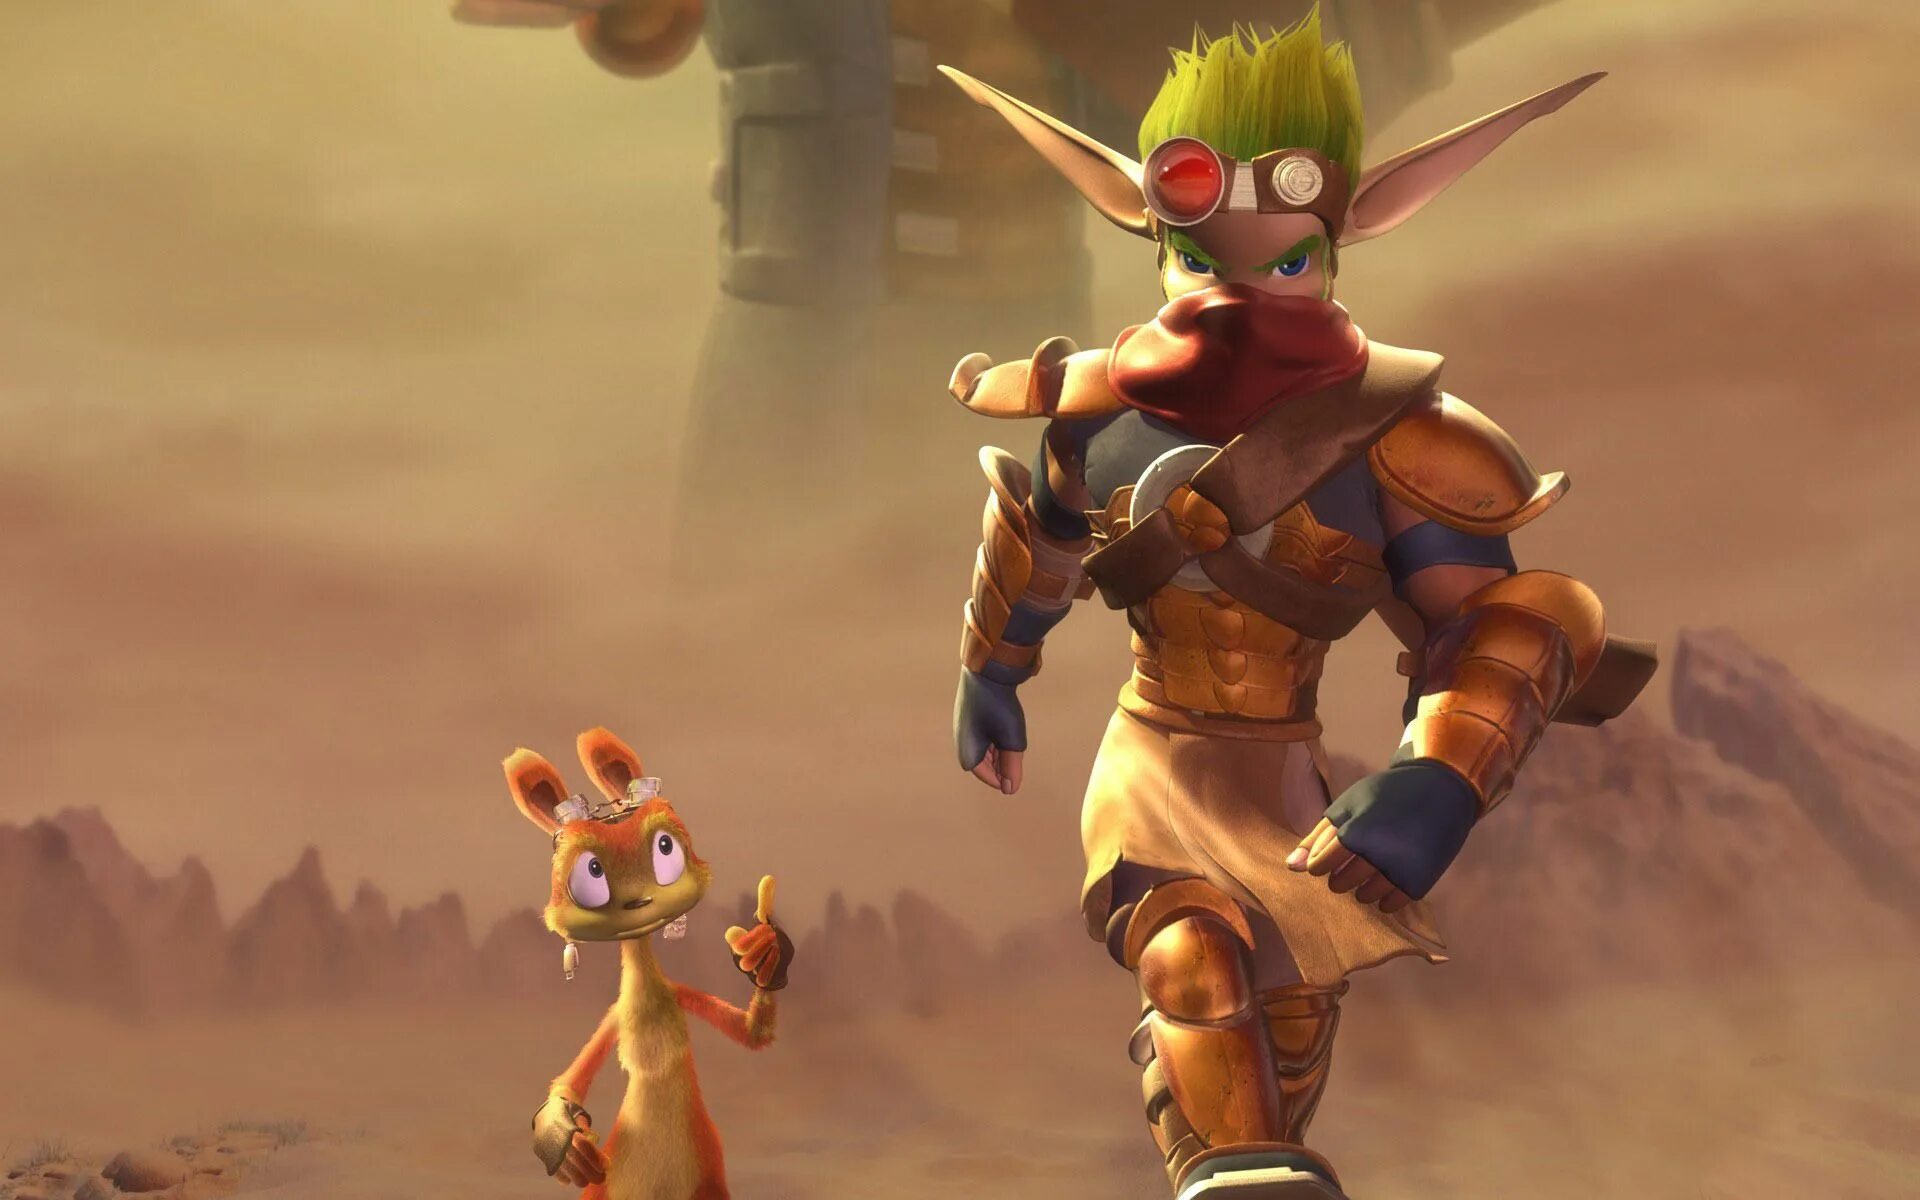 Game jack 2. Jak and Daxter 3. Jak and Daxter ps3. Джек и Декстер. Jack 3 ps2.